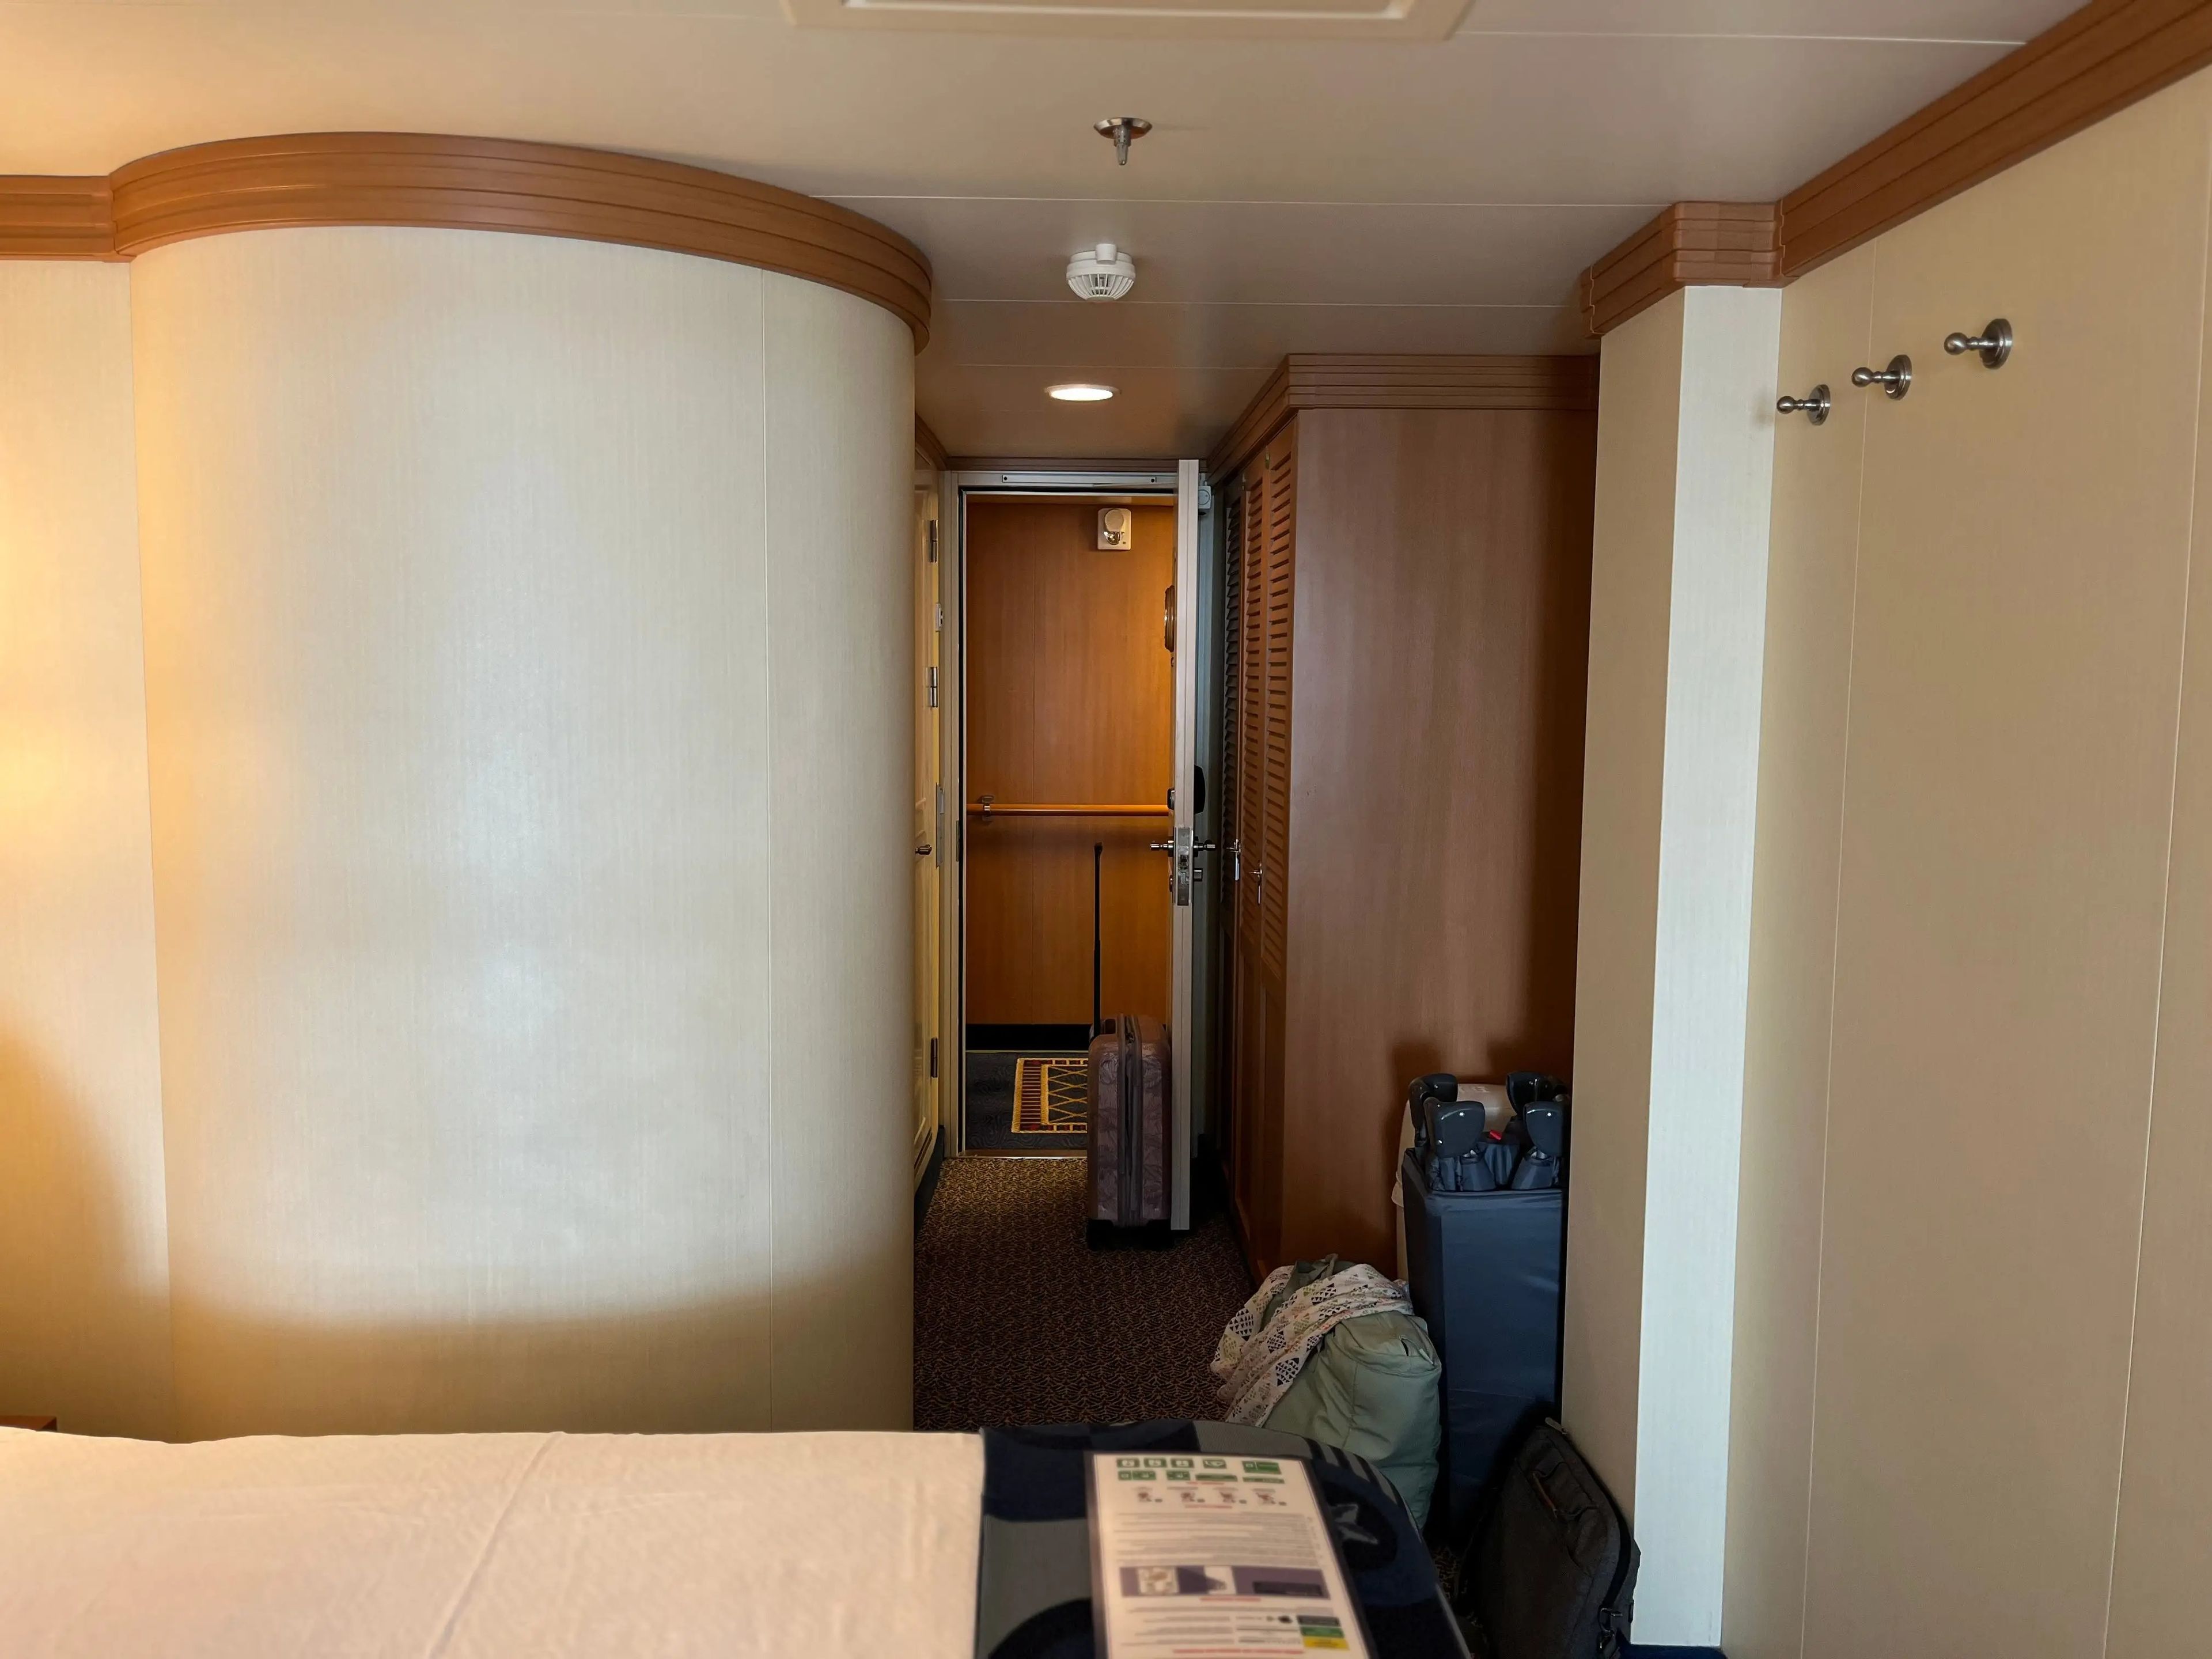 rounded wall outside a bathroom in a family stateroom on a disney cruise